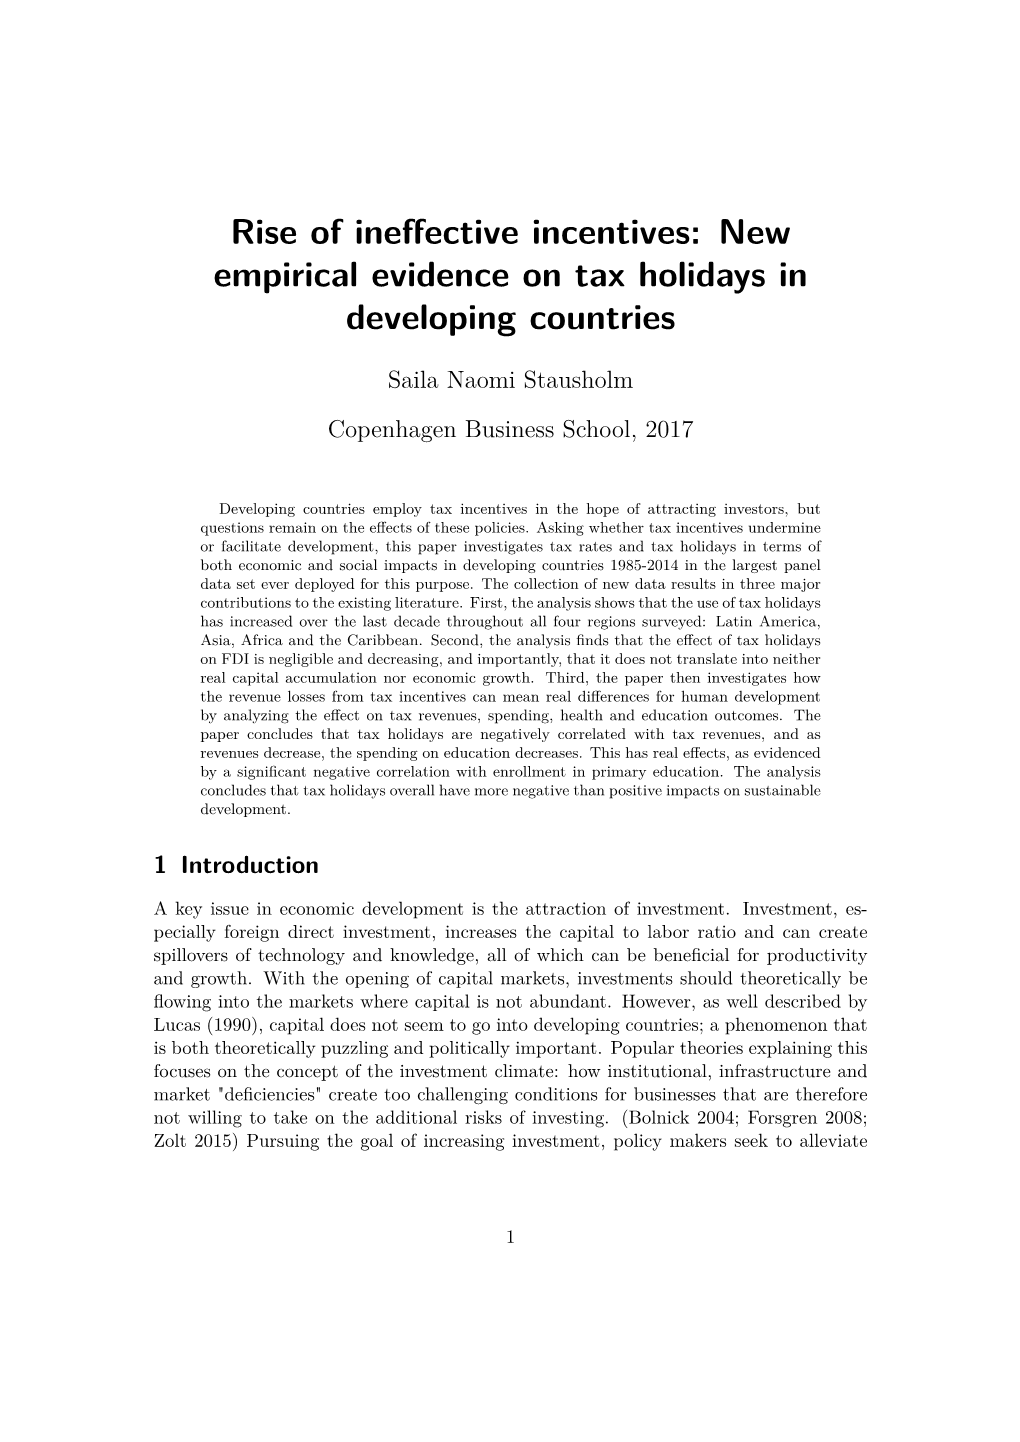 New Empirical Evidence on Tax Holidays in Developing Countries